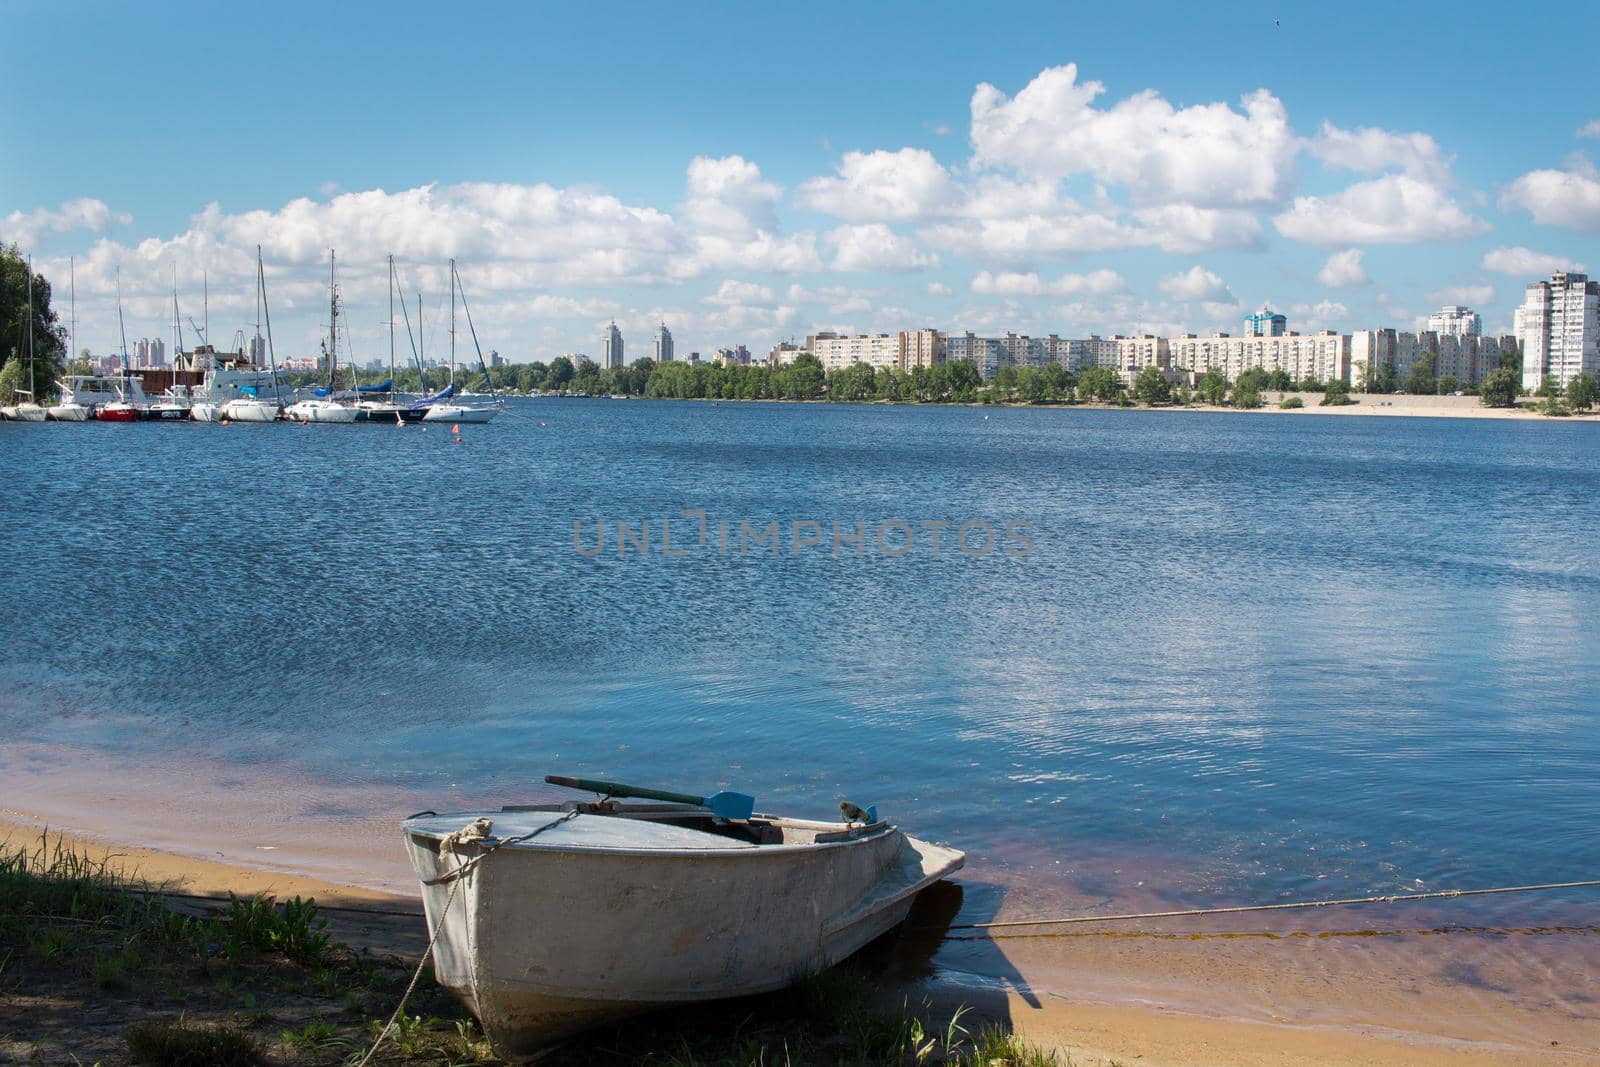 Small fishing boat with paddles stands near marina with sailing yachts and boats on river bank